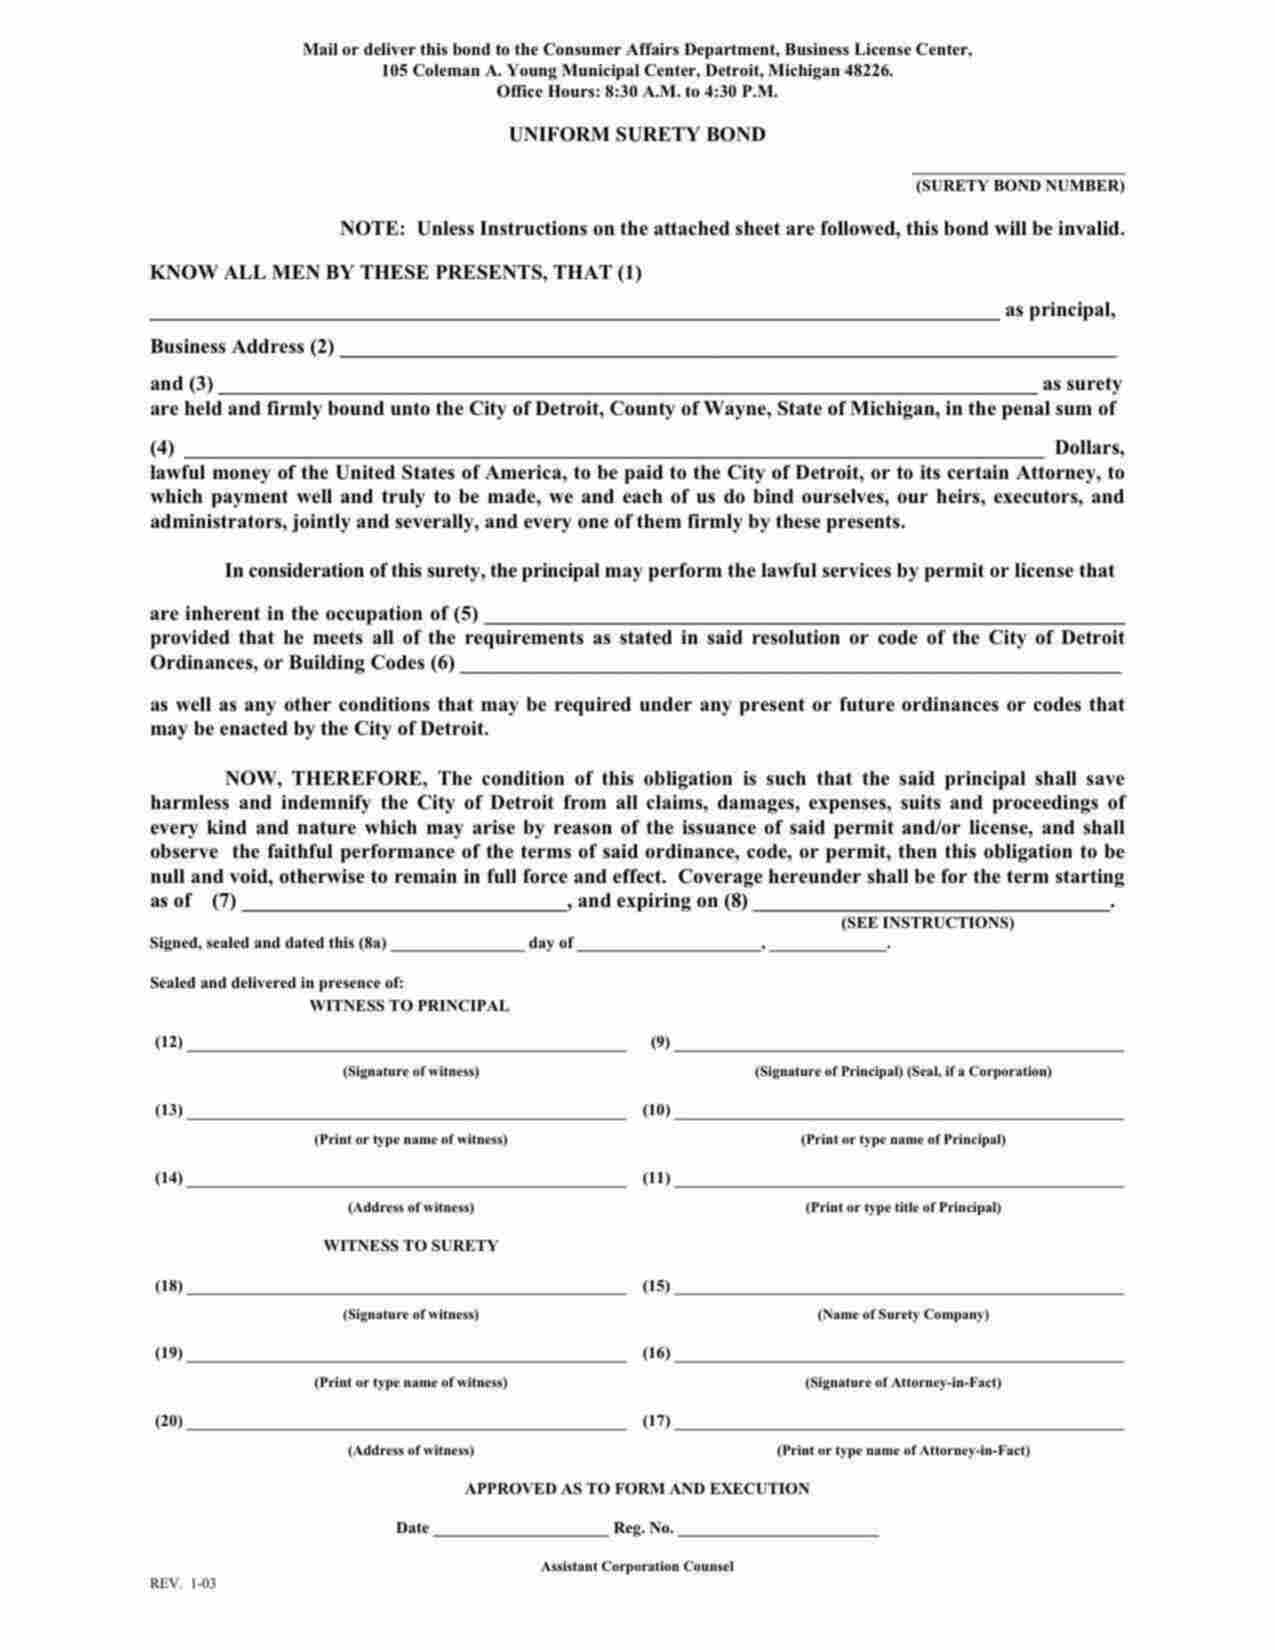 Michigan Erector or Owner of Canopies Bond Form